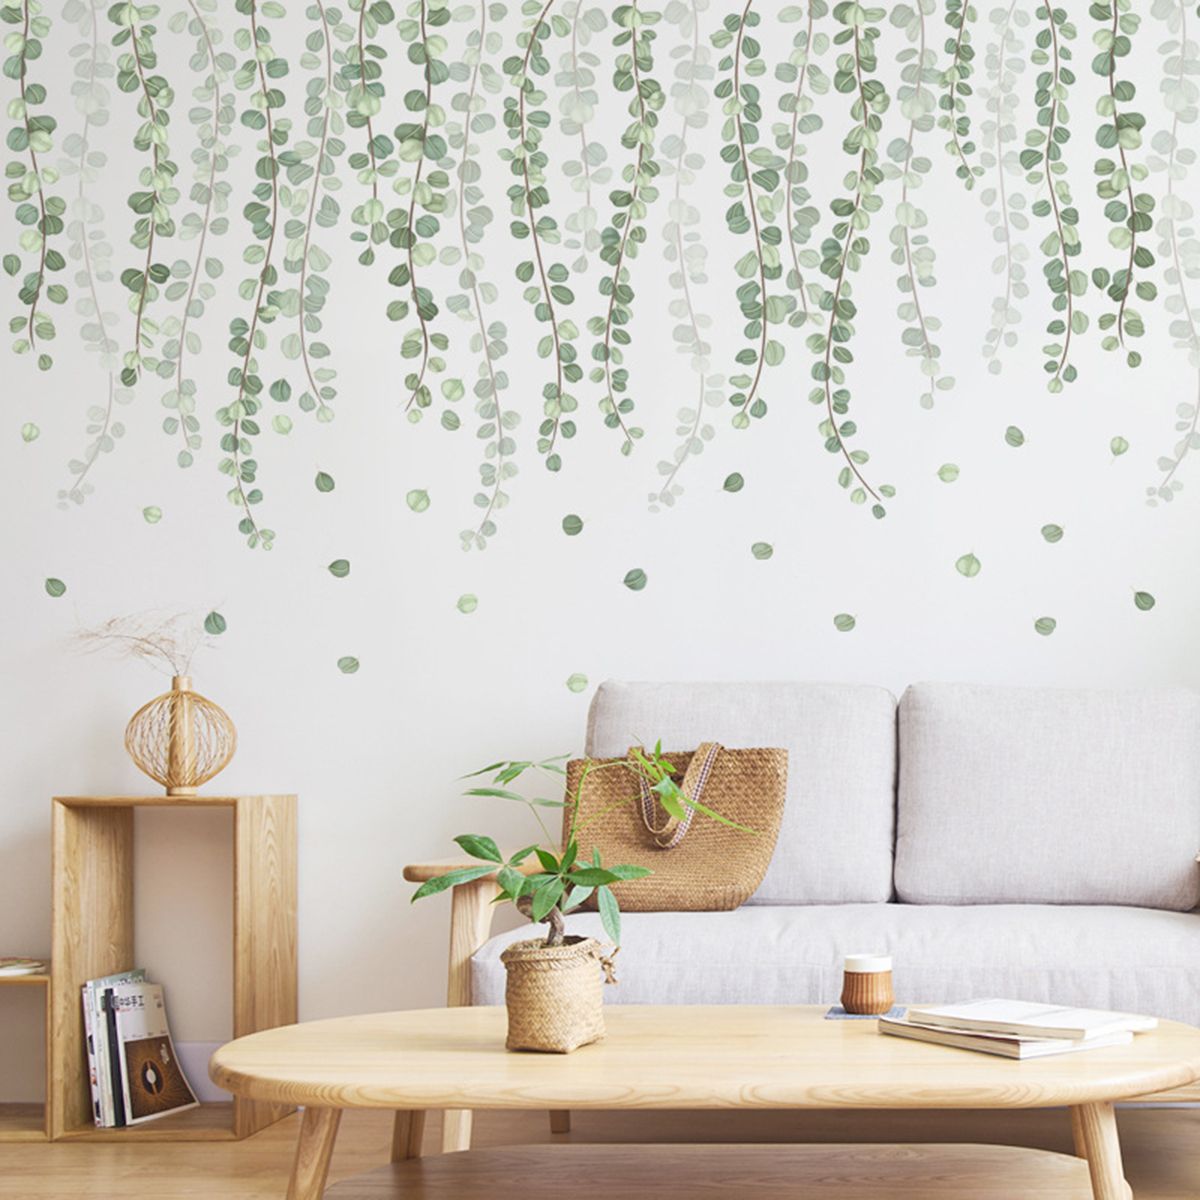 Large-Tropical-Leaves-Removable-Wall-Sticker-Decal-PVC-Mural-Home-Decor-Art-Gift-1713630